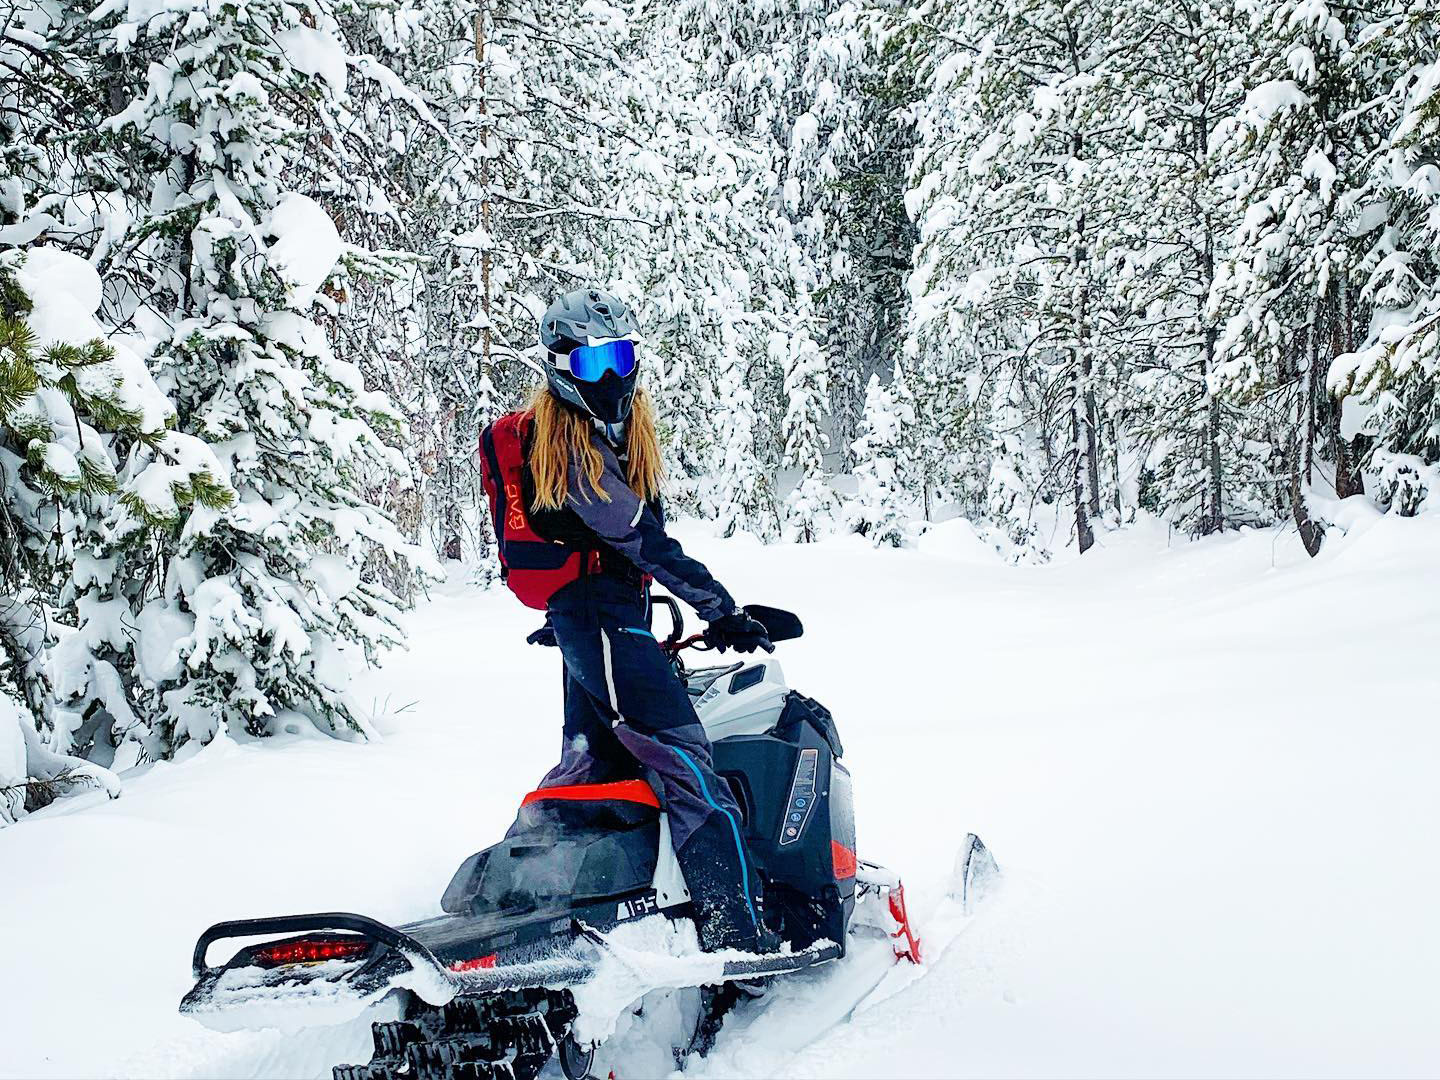 Stefanie Dean geared up for a snowy ride on her Ski-Doo snowmobile